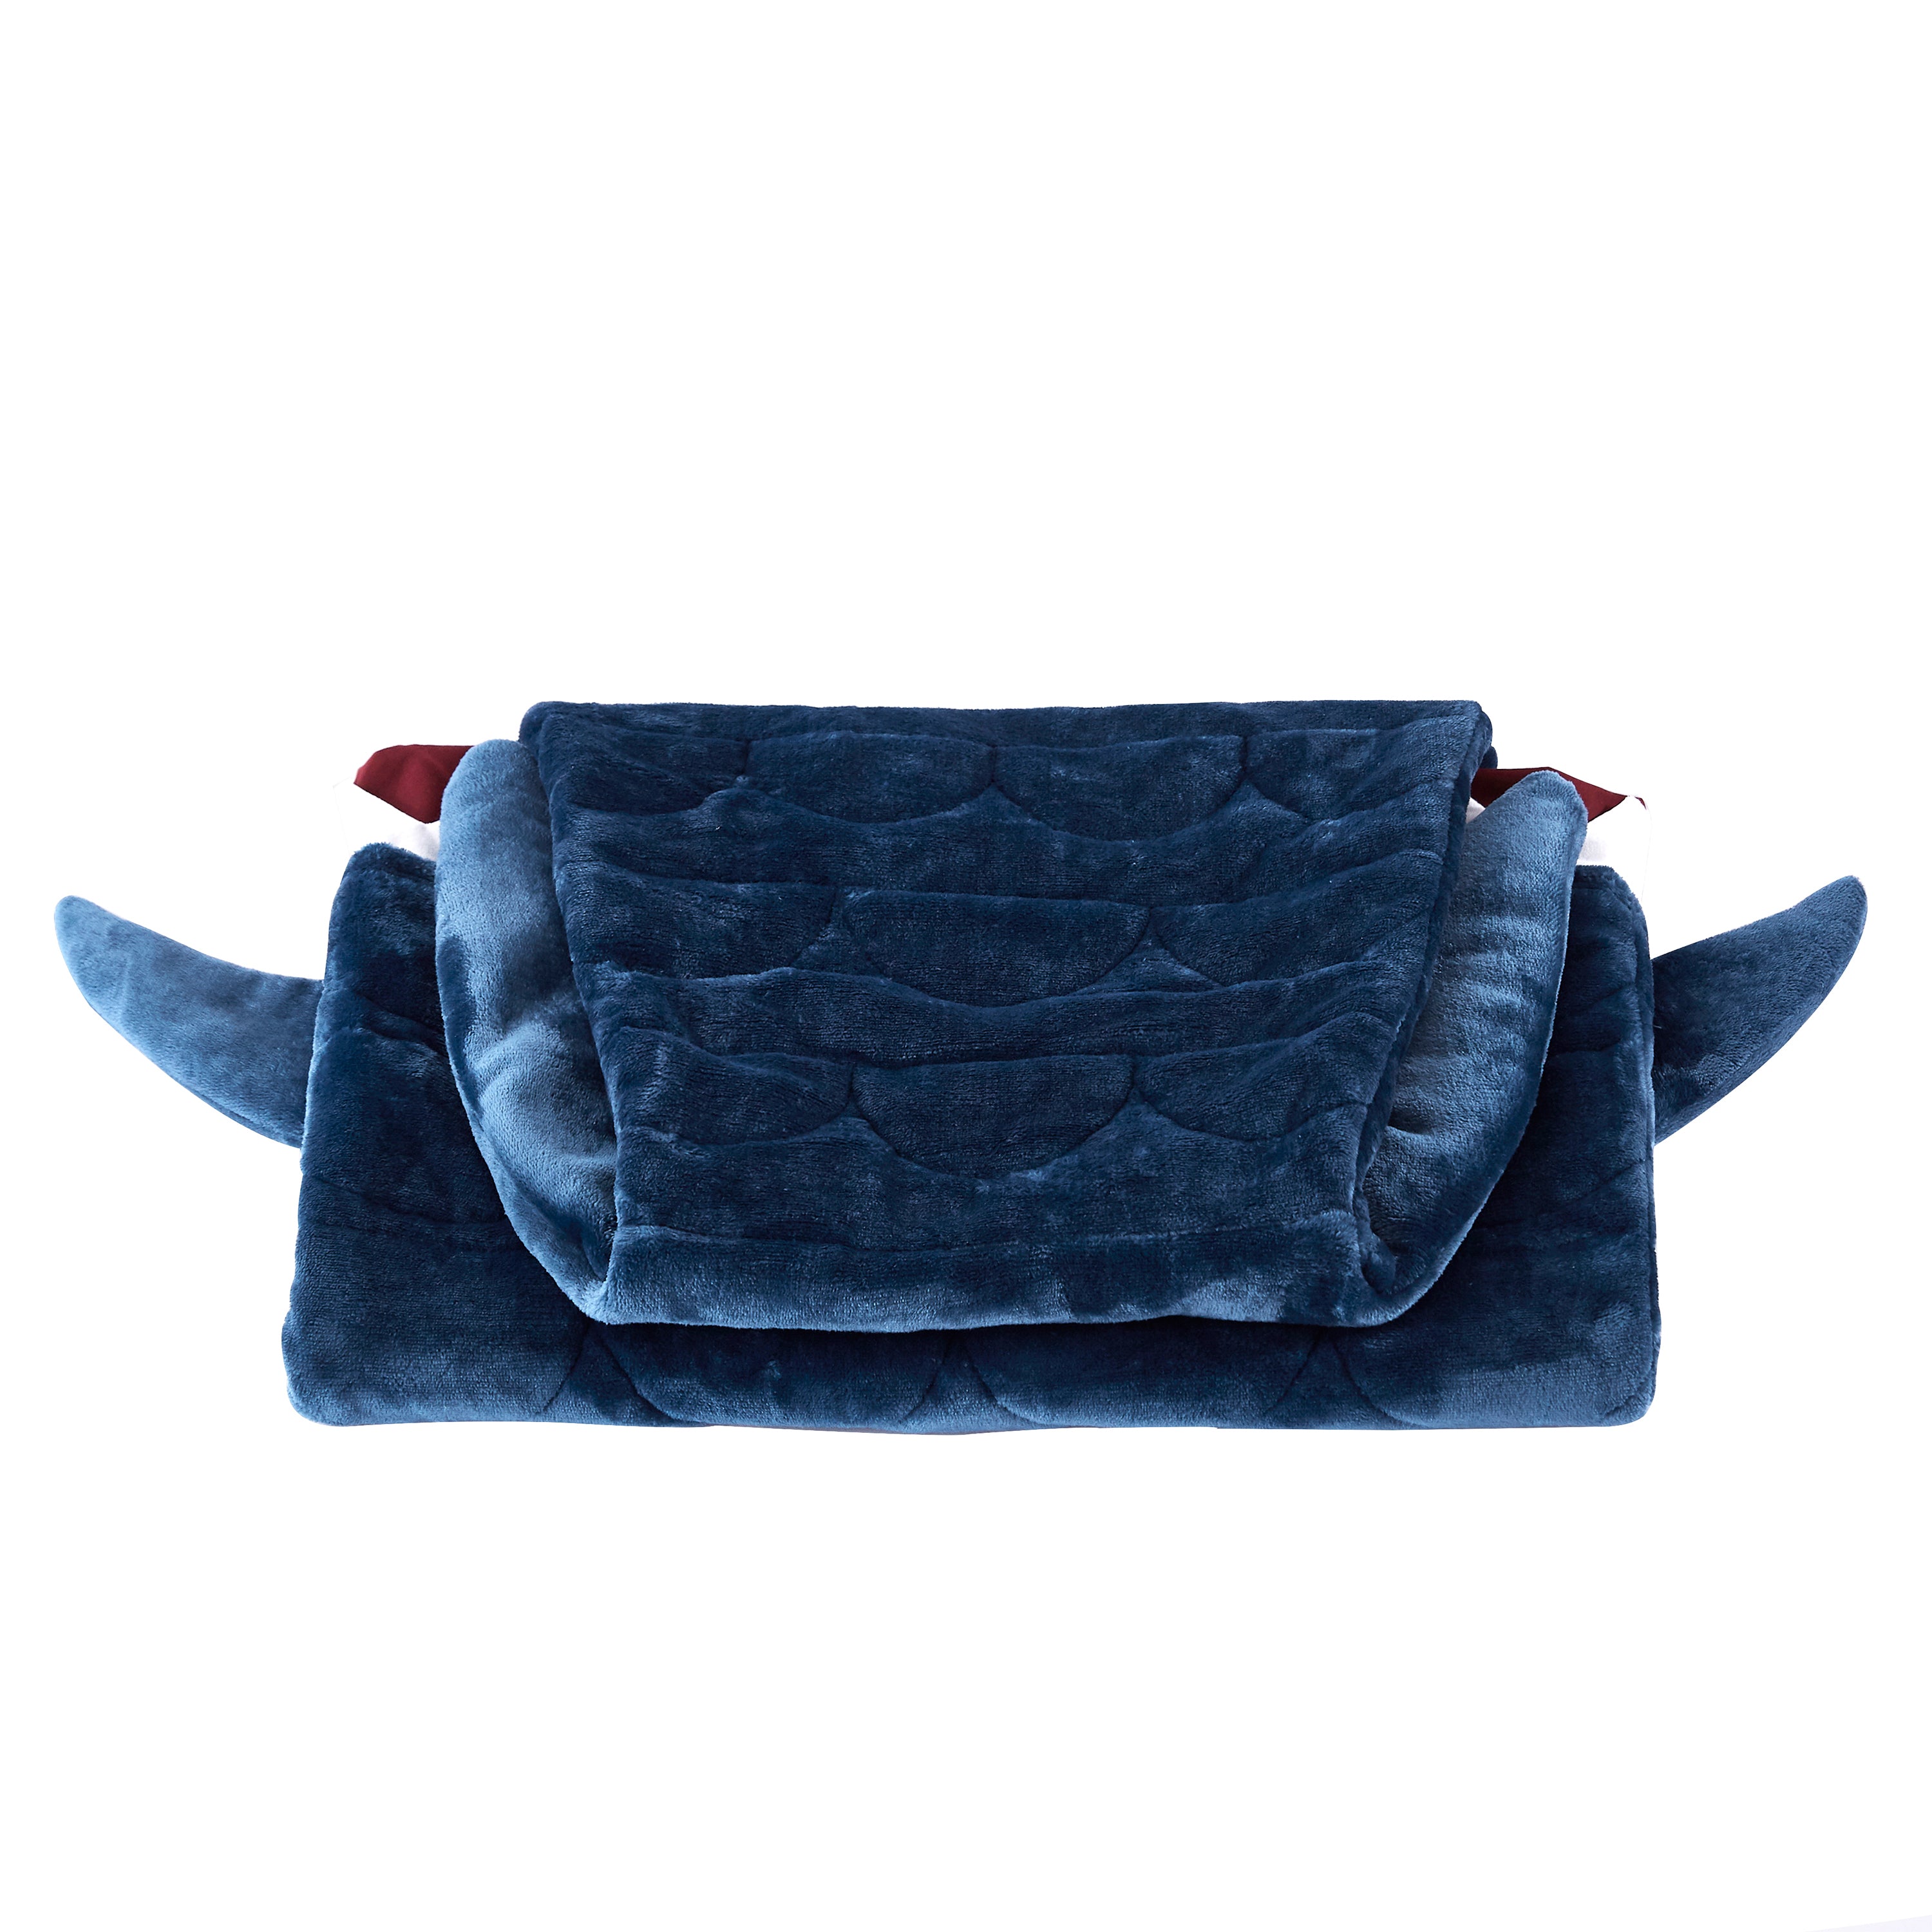 Kids Shark Tail Weighted Blanket- 5 lb